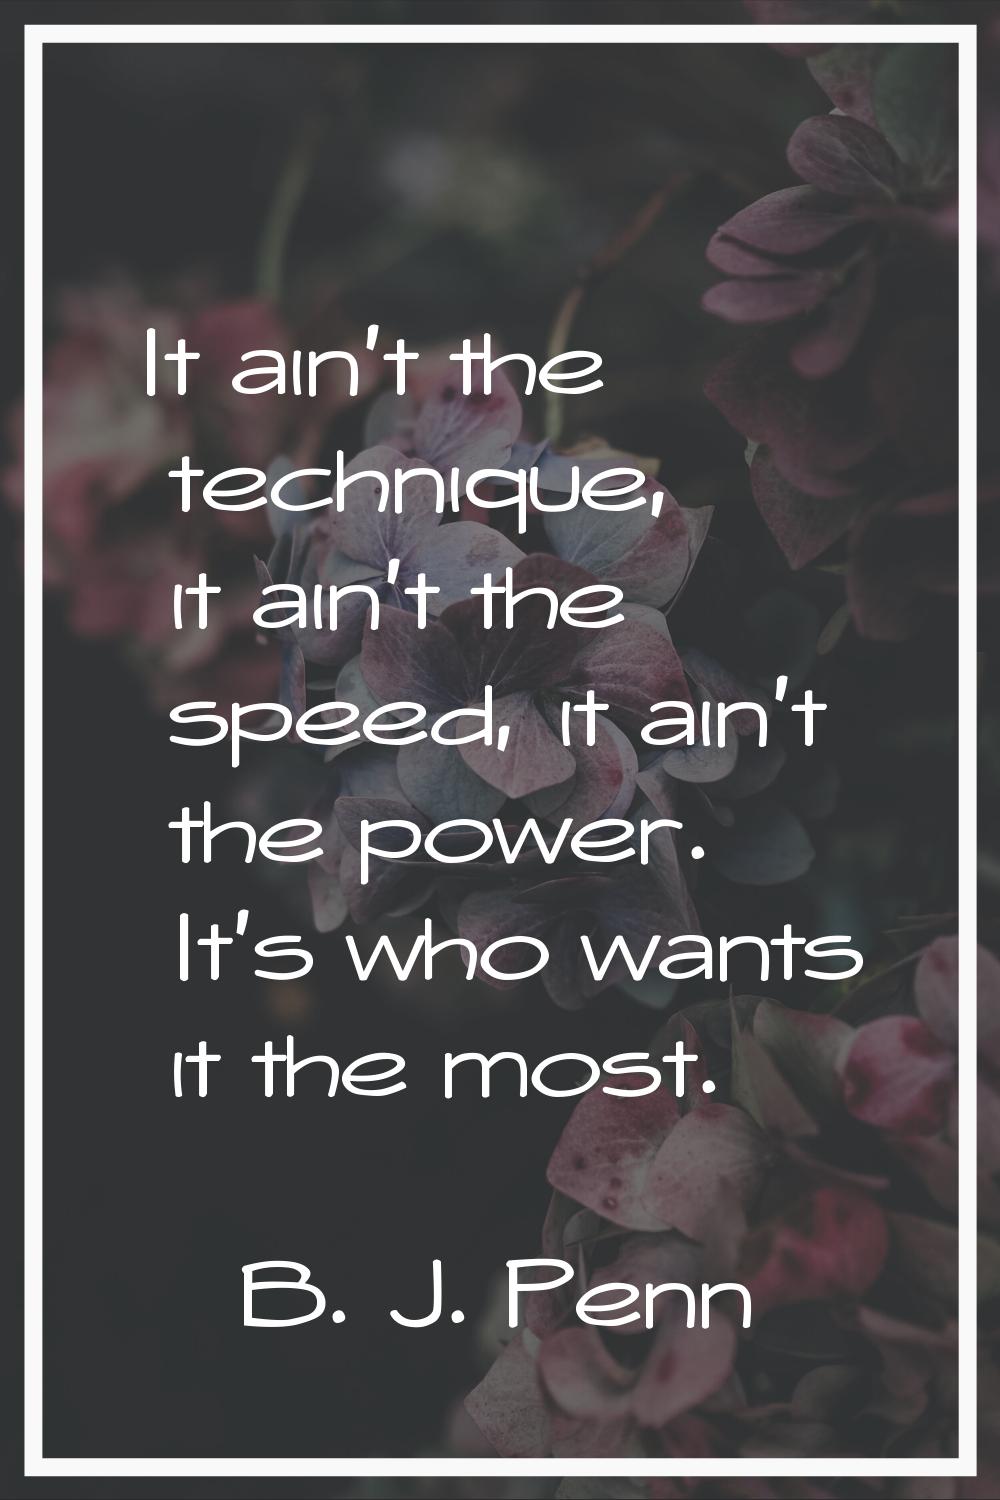 It ain't the technique, it ain't the speed, it ain't the power. It's who wants it the most.